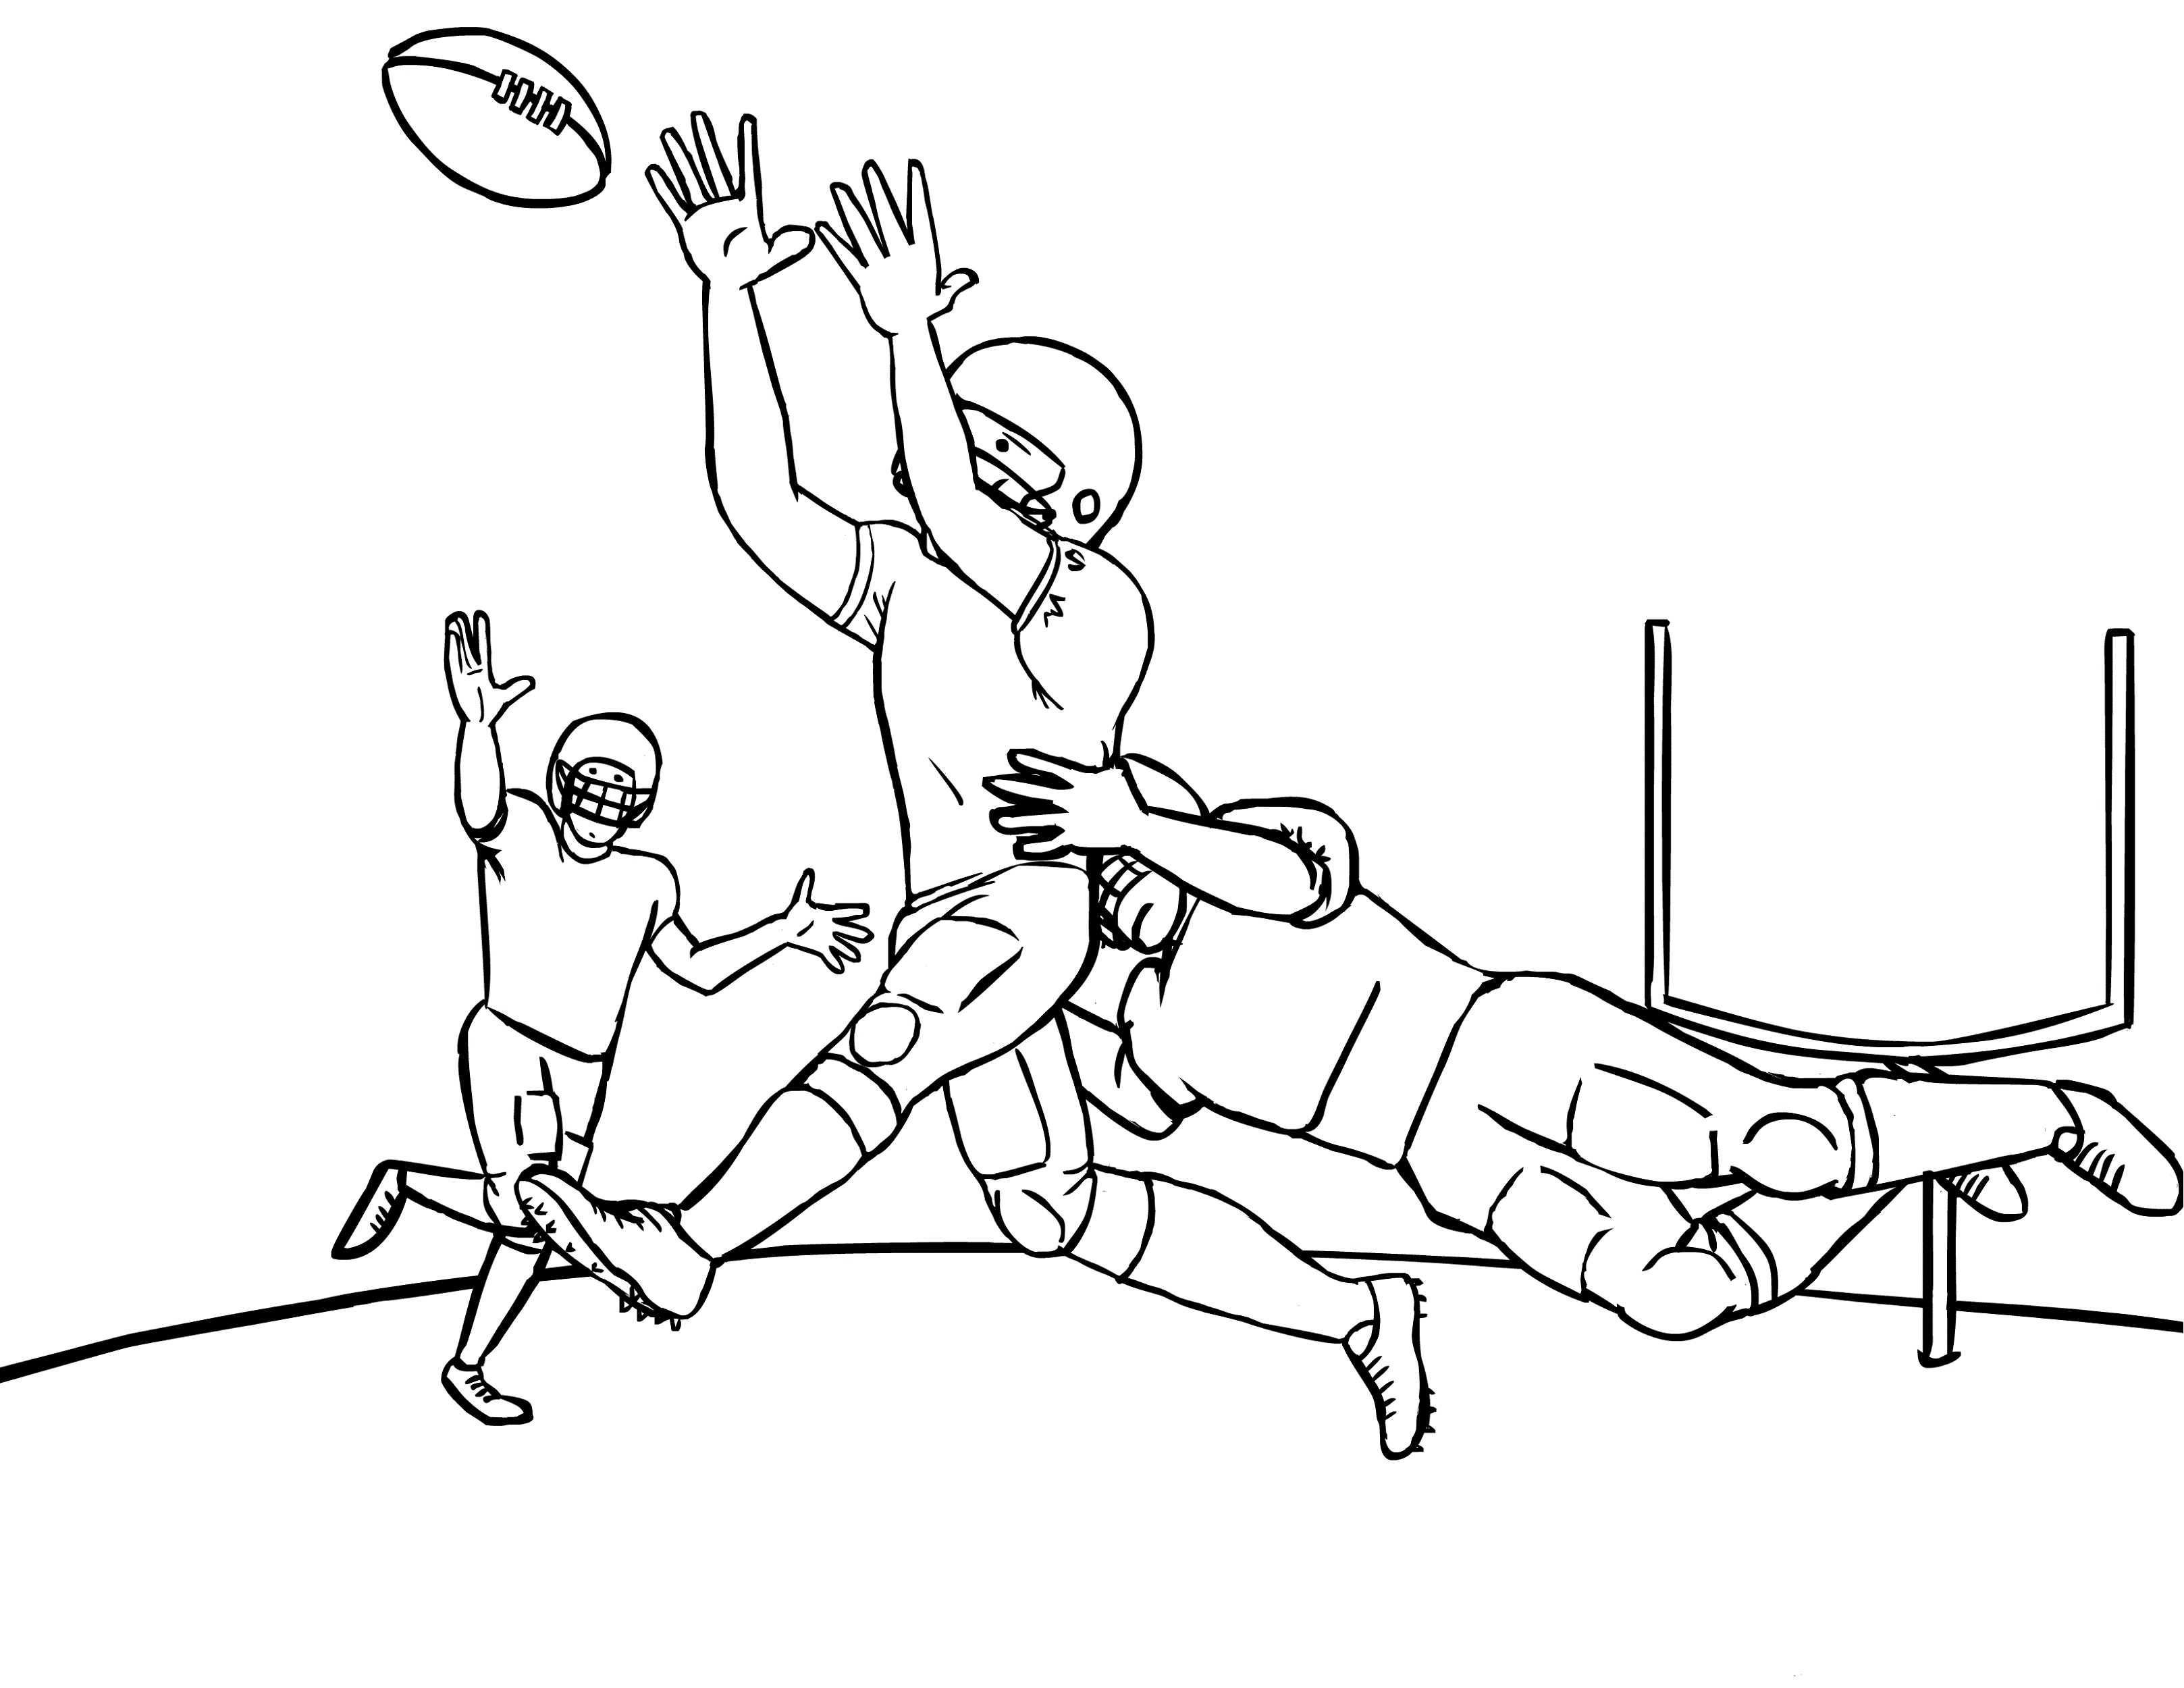 Football Coloring Pages Printable